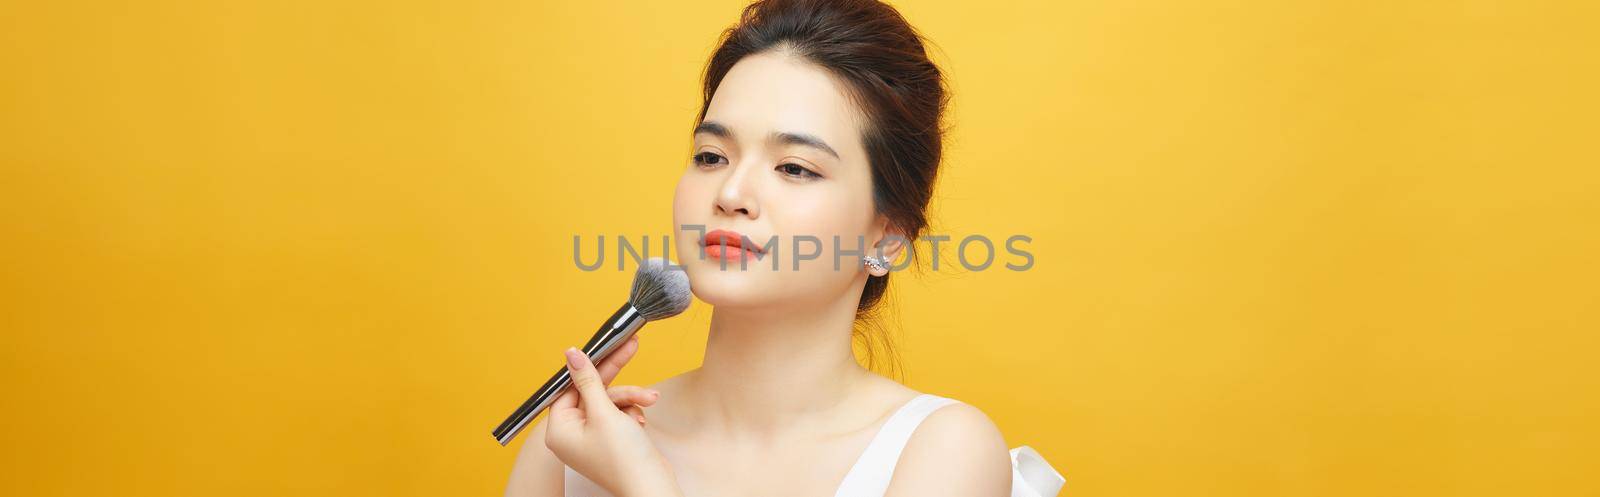 beautiful woman holding makeup brush over yellow by makidotvn